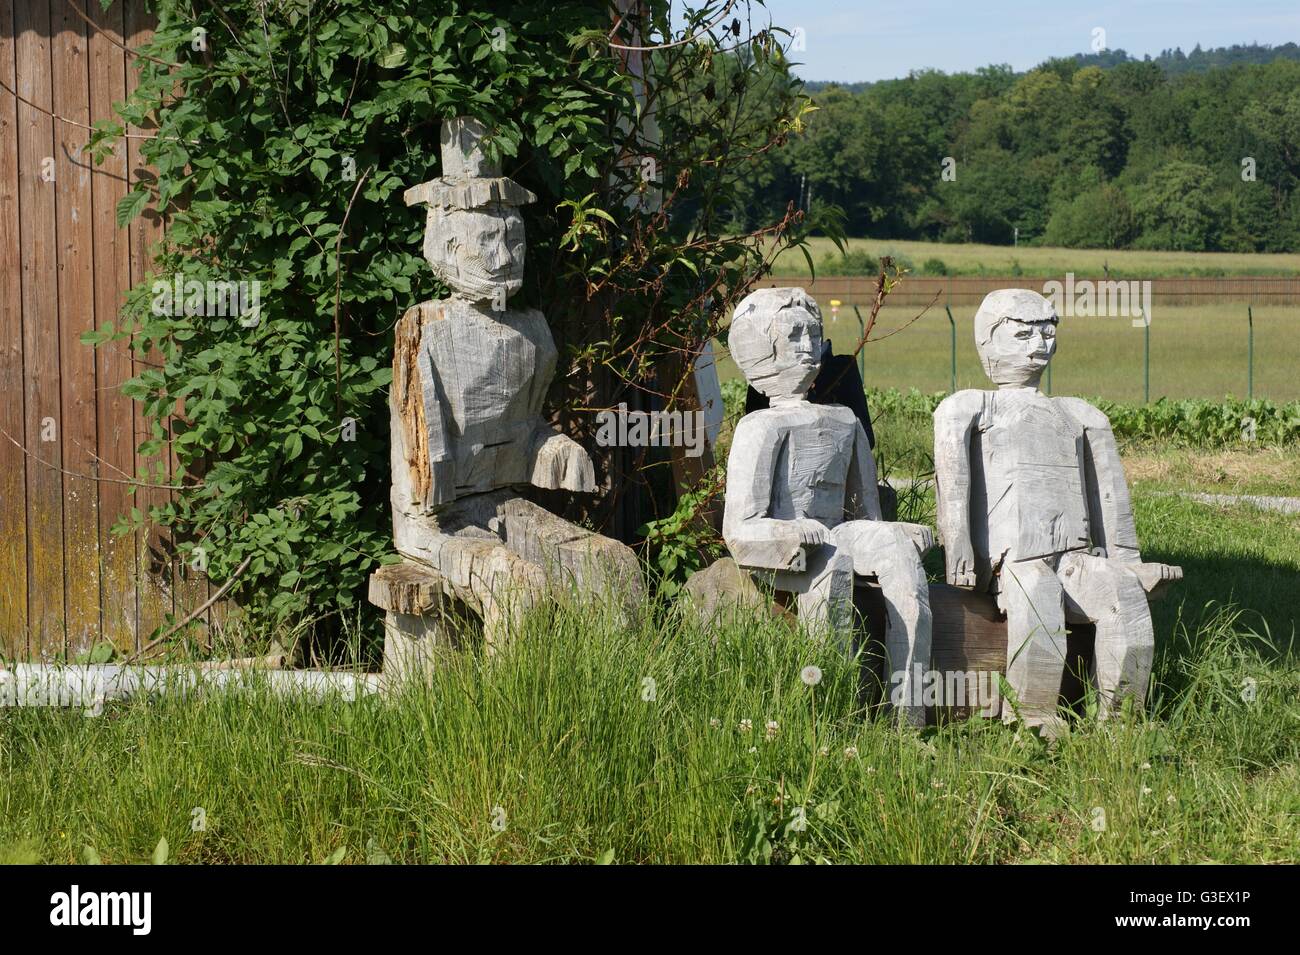 Sculptures or statues in sitting position Stock Photo